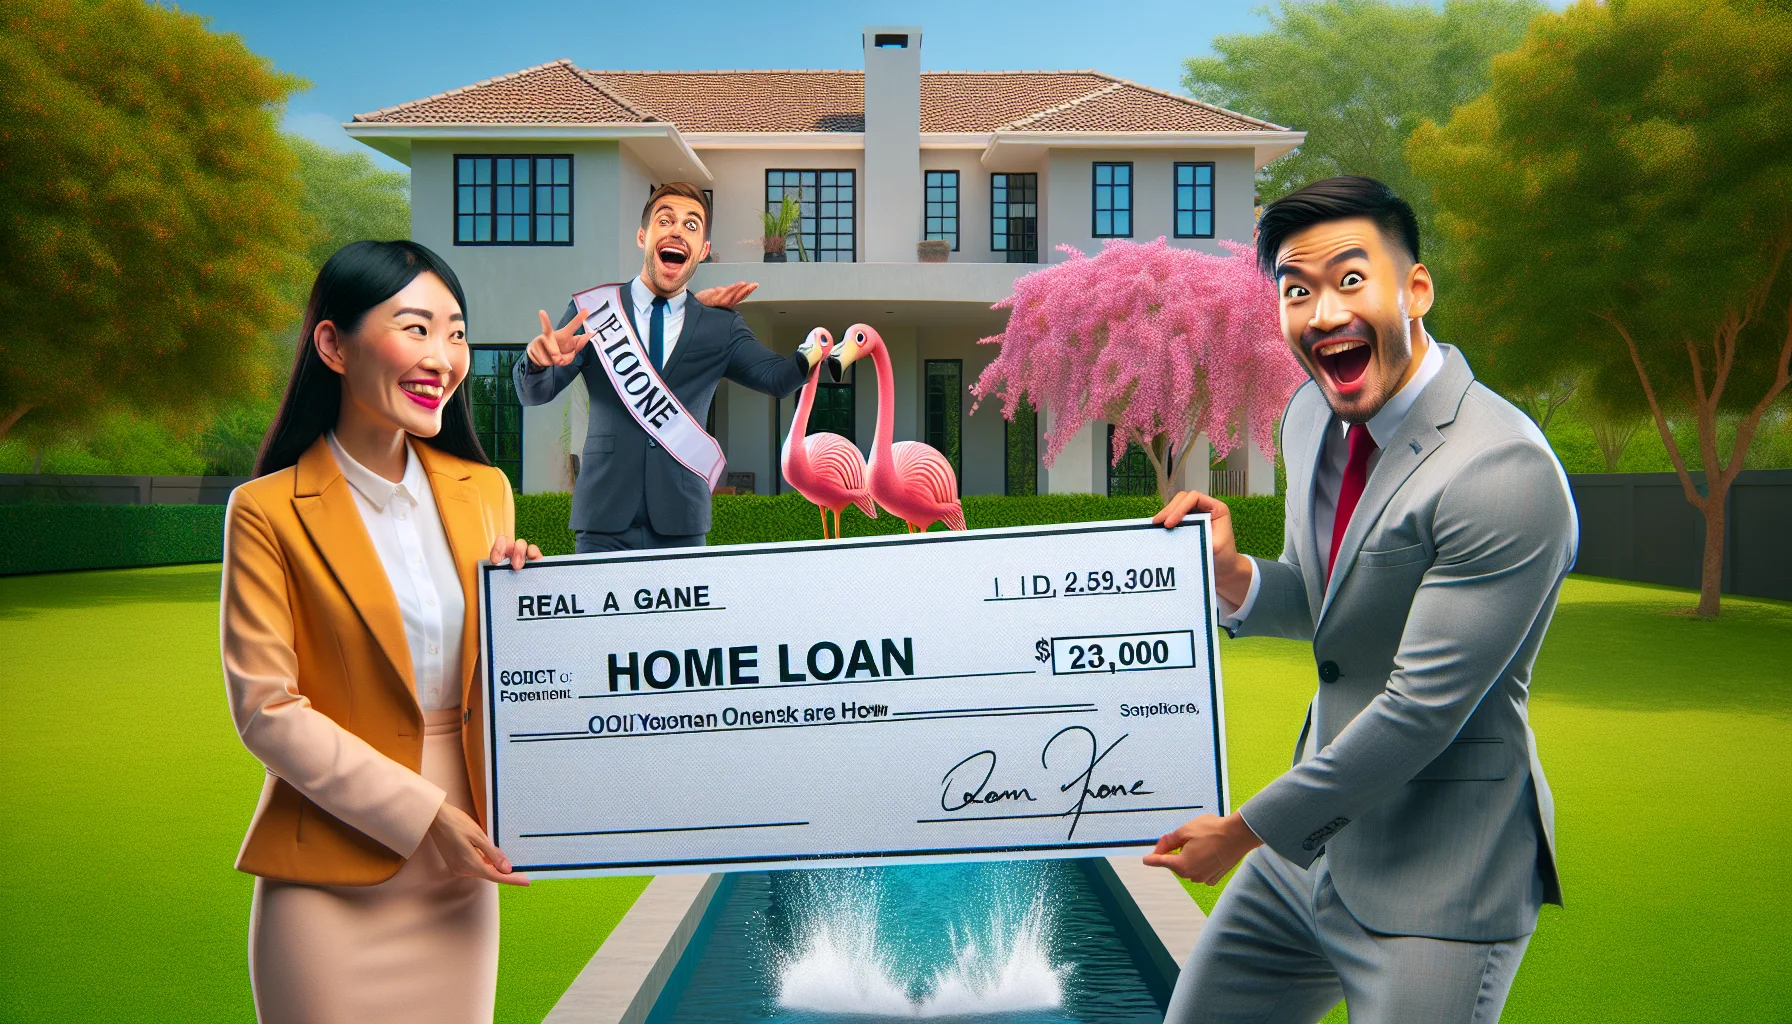 Create an image that showcases an idealized, humorous scene of home loan assistance in the real-estate world. Picture this: A real estate agent, an Asian woman in a bright colored suit, showing a cheerful Hispanic man in casual attire around a stunning, dream-like property with a lush garden in the backdrop. Nearby, a friendly, white bank representative, in professional attire, is dramatically presenting an oversized, symbolic check labeled 'Home Loan' with a huge grin on his face. Don't forget to add funny touches, like a pair of pink flamingos by the garden's pond or a small rainbow tailing out of the bank representative's briefcase.